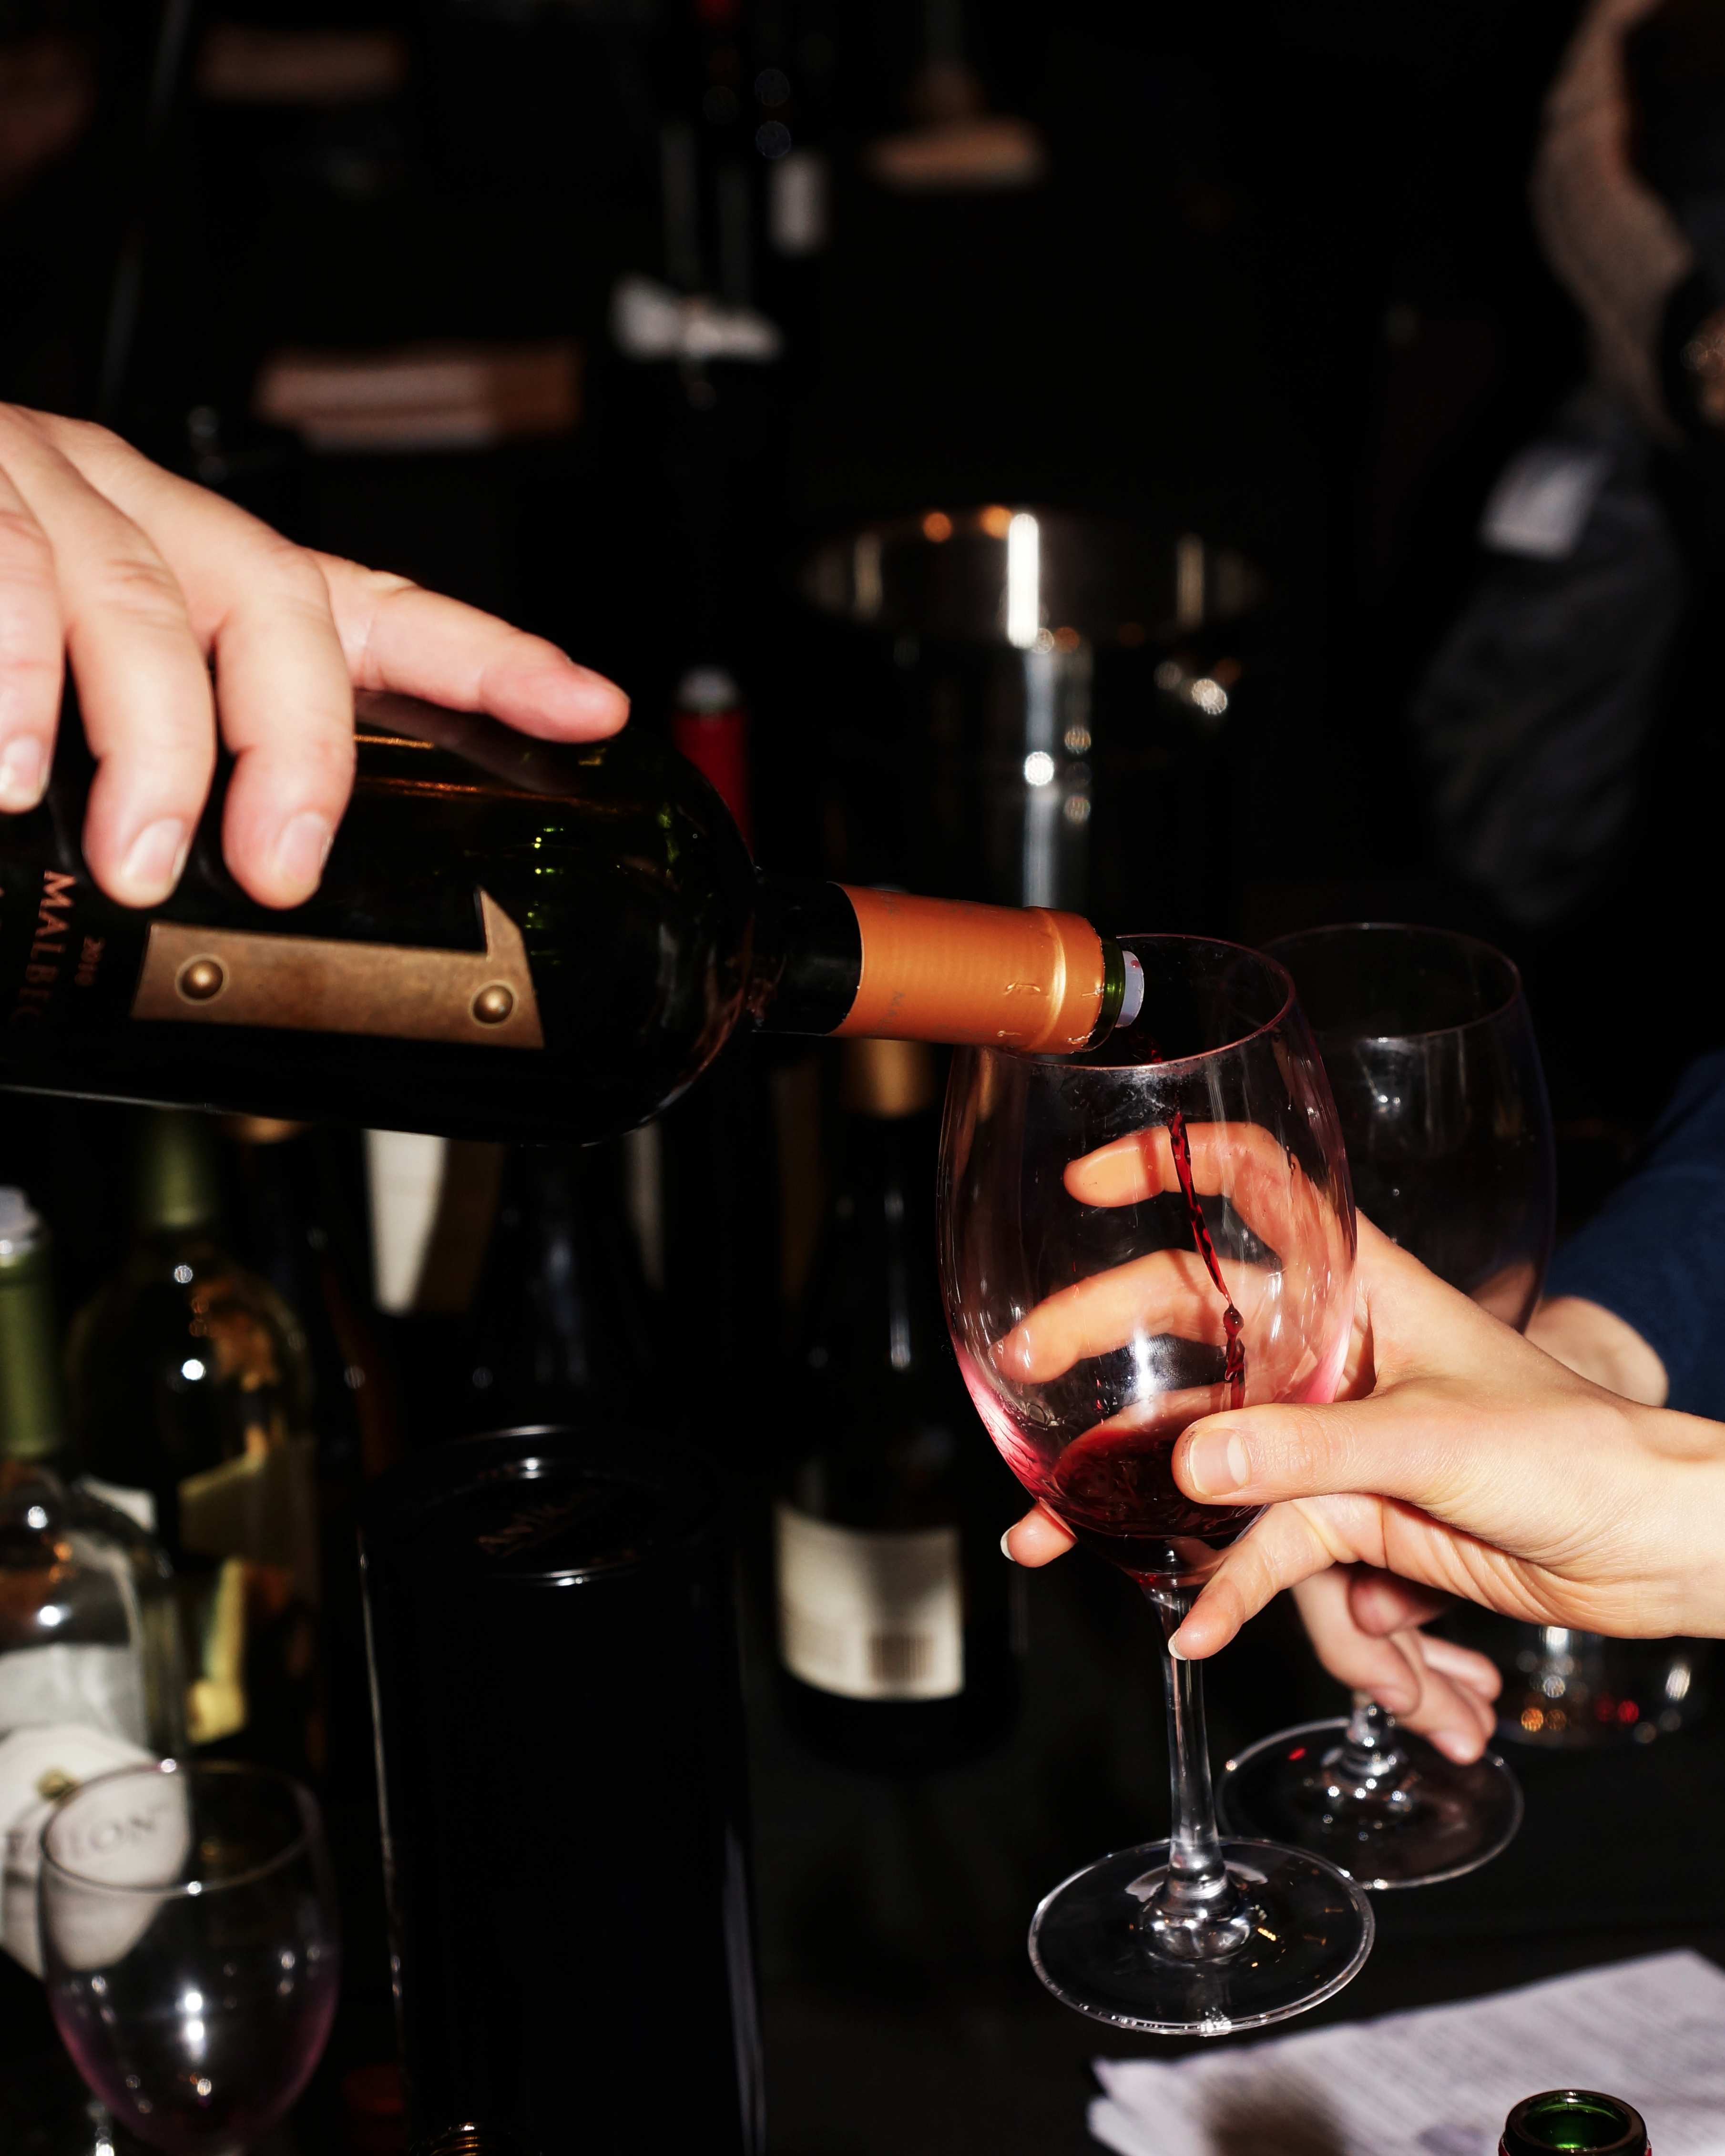 New York Wine Events presents the 6th Annual NYC Winter Wine Festival  2/7/15 featuring 250+ wines selected by the experts at Vintry Fine Wines.